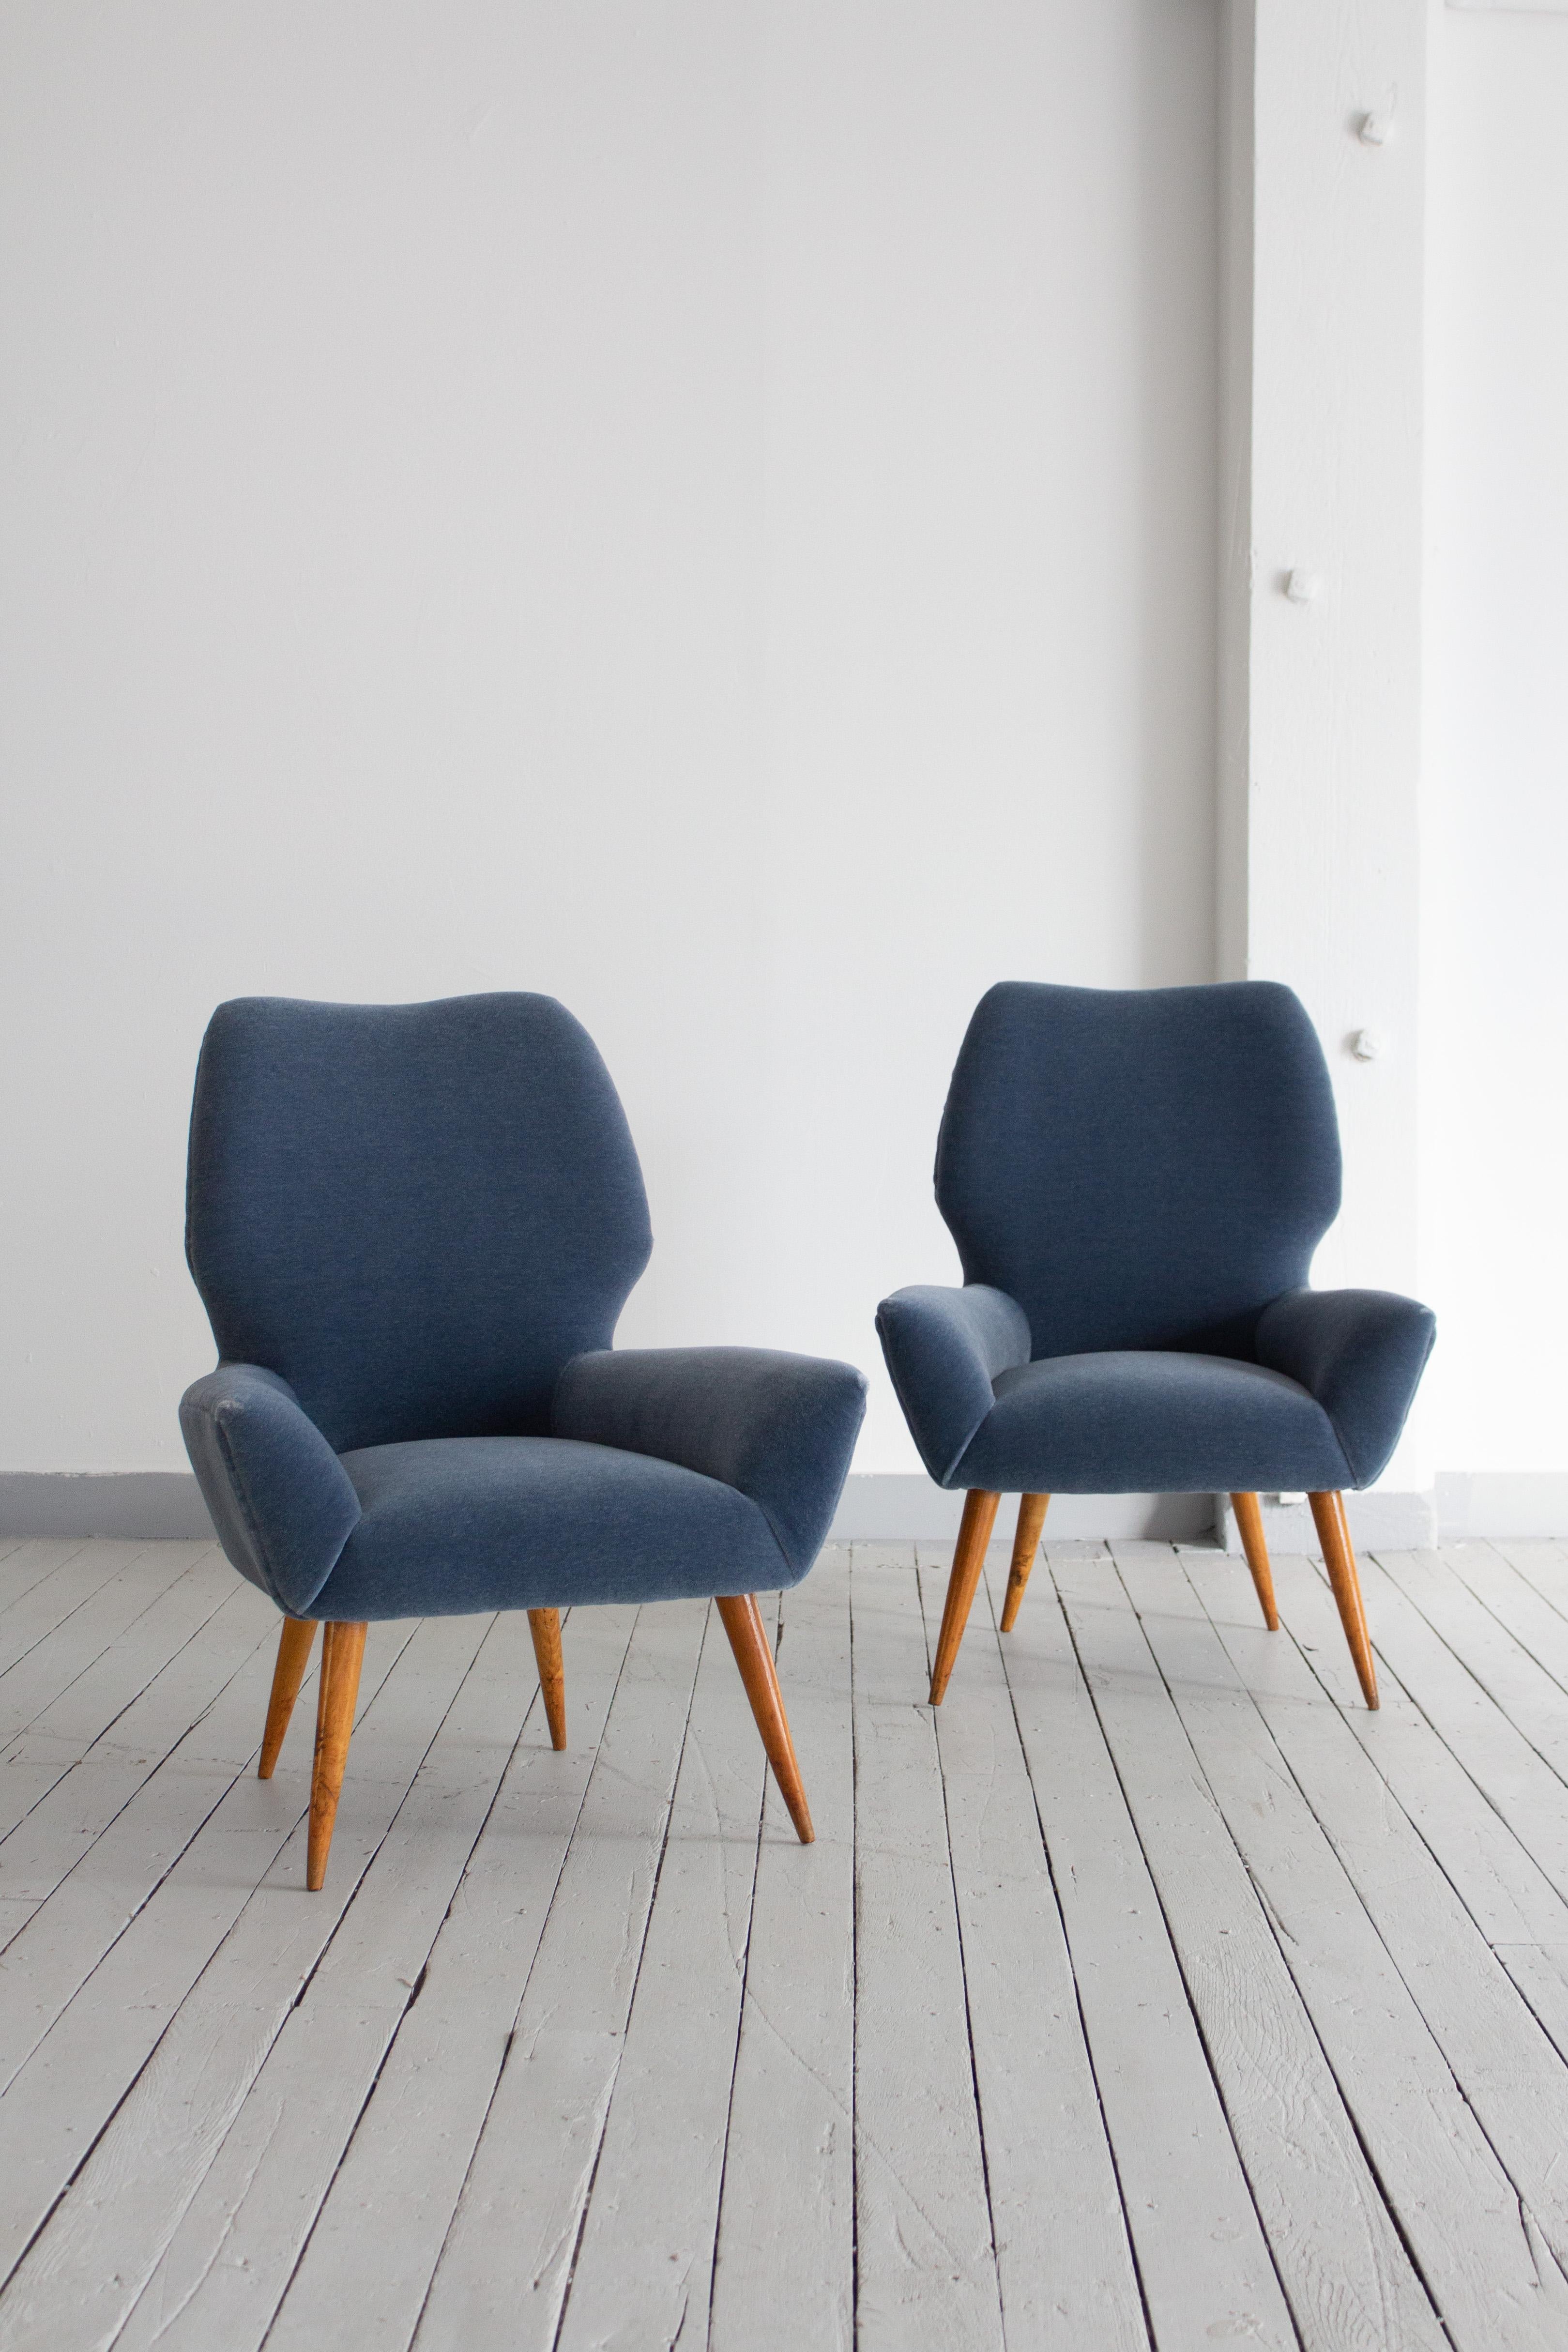 A pair of mid century Italian armchairs in the style of Melchiorre Bega. Petite in size. Newly upholstered in a dusty blue mohair. Patinaed wood legs. Sourced in Northern Italy.